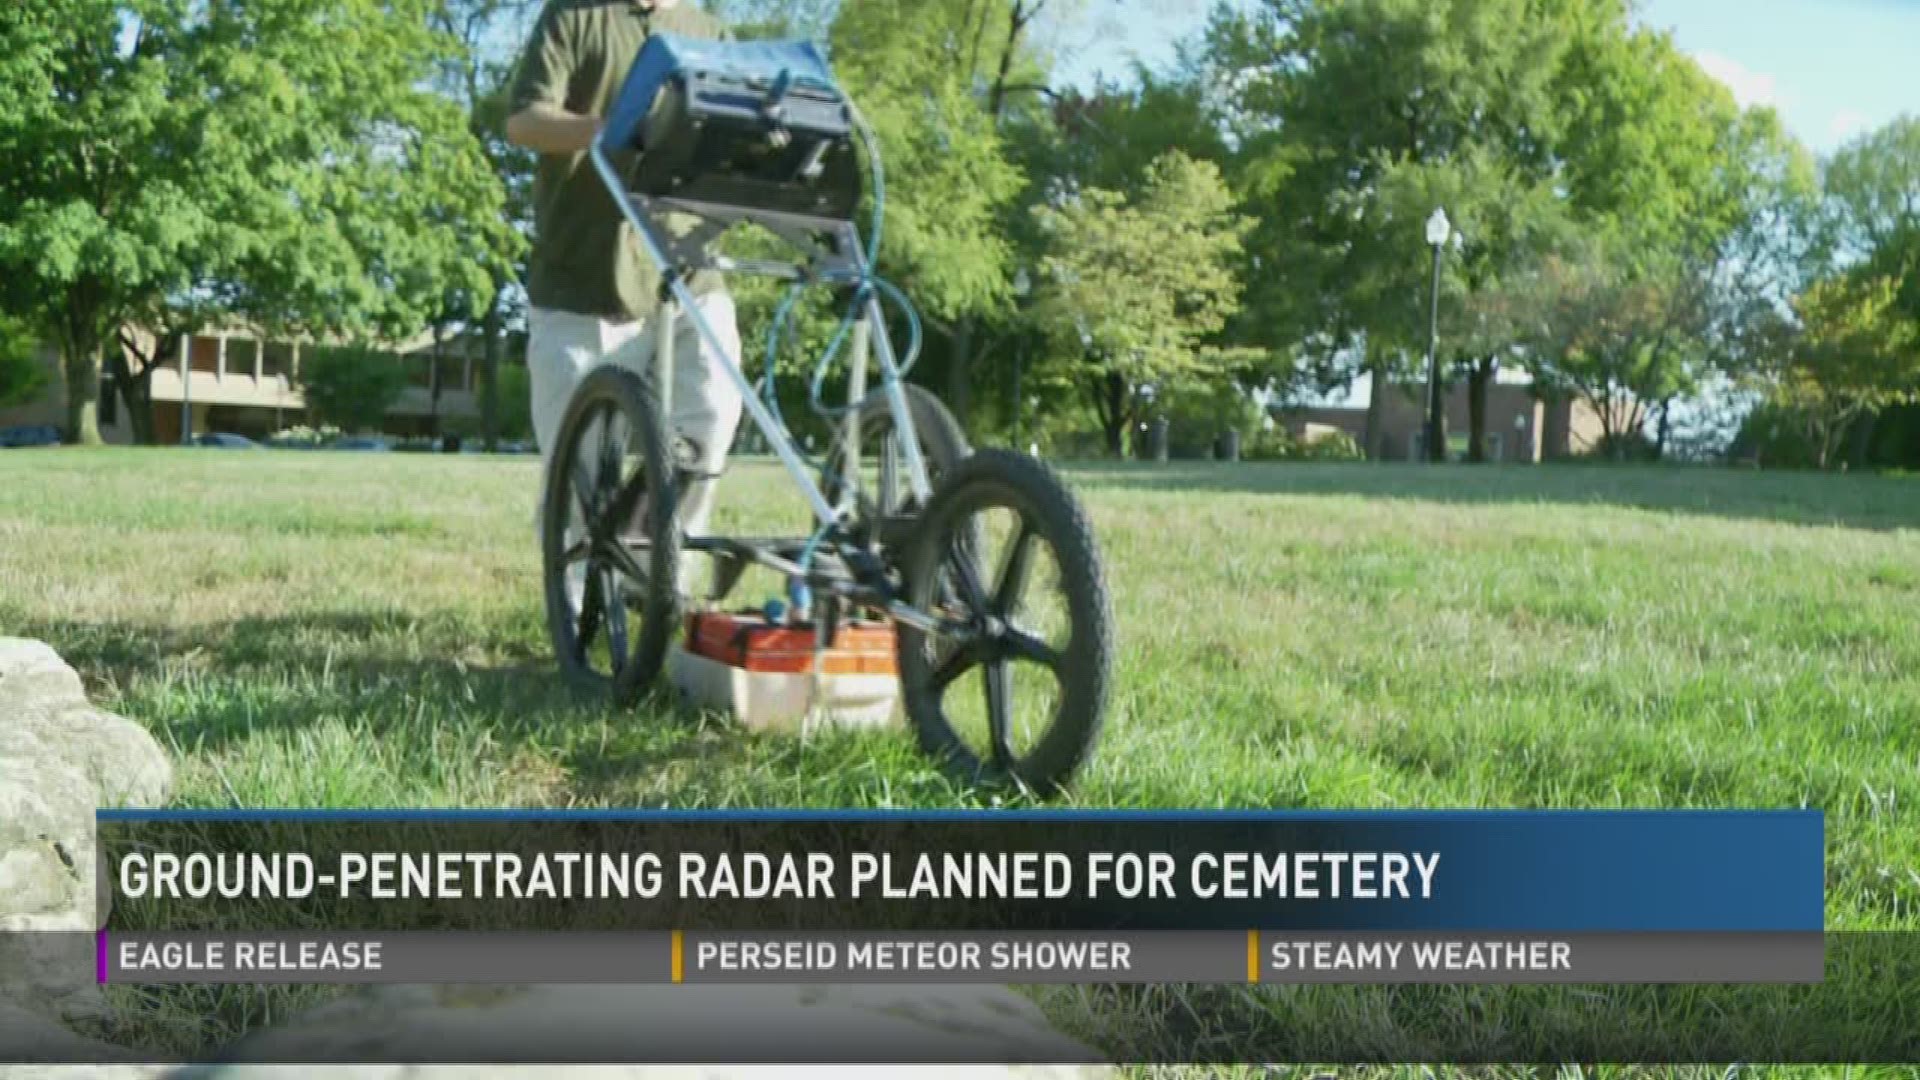 A ground-penetrating radar unit is being used to search for unmarked burials before development is approved for a piece of property near Mars Hill Cemetery. August 11, 2016.